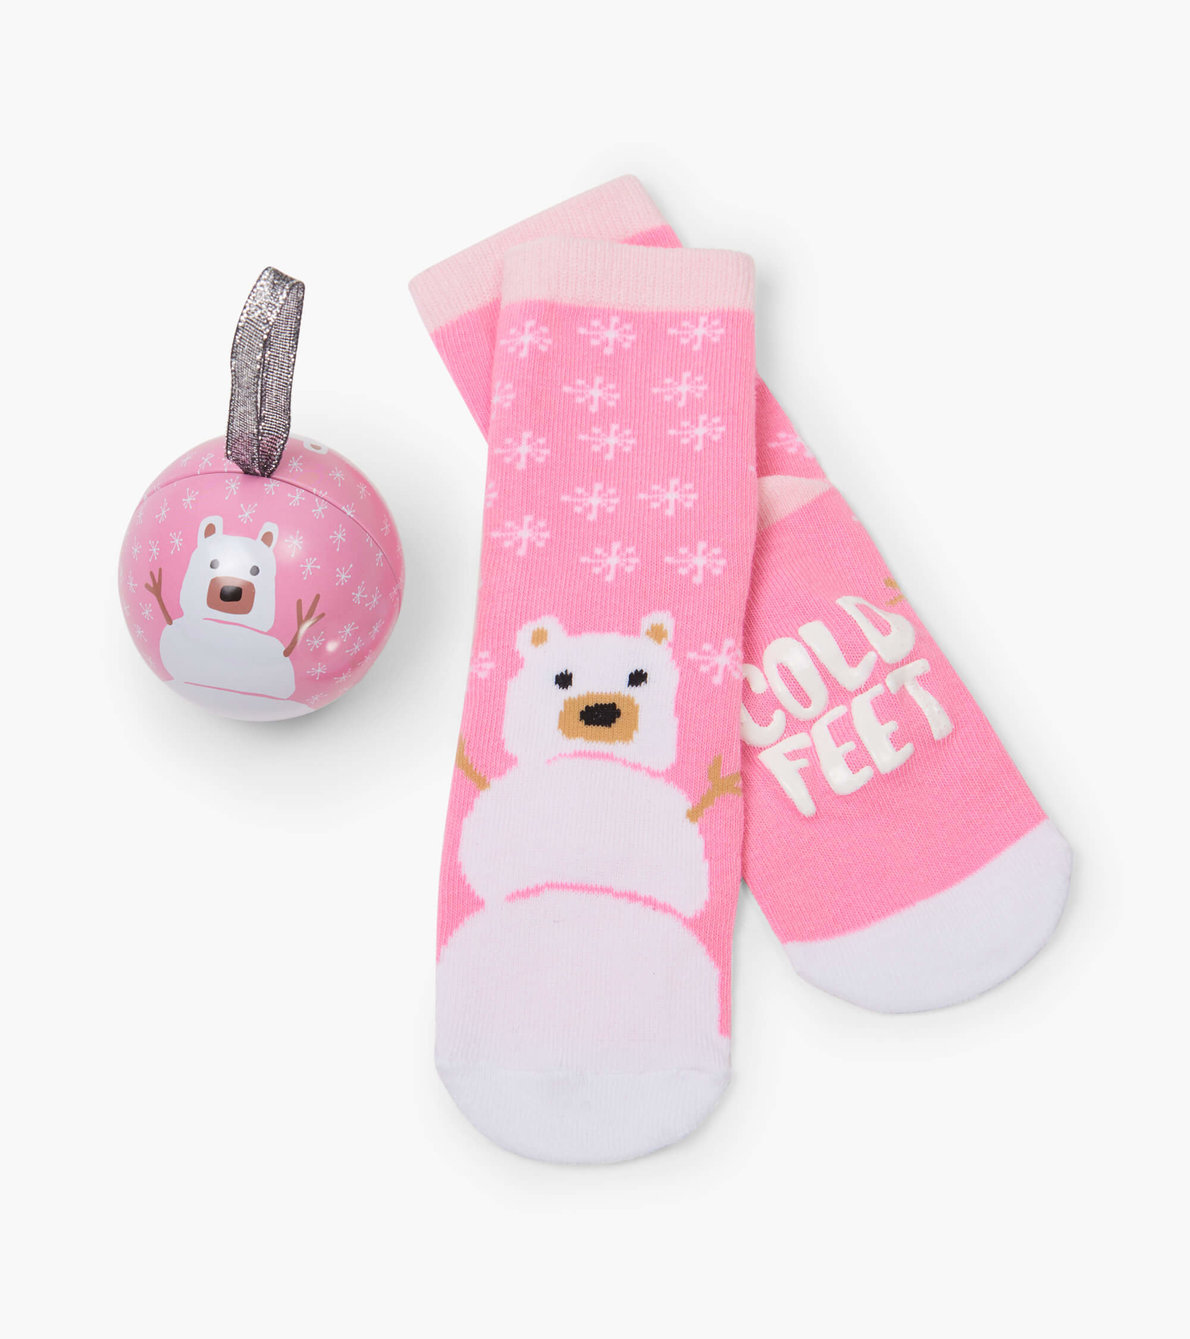 View larger image of Cold Feet Kids Socks In Balls